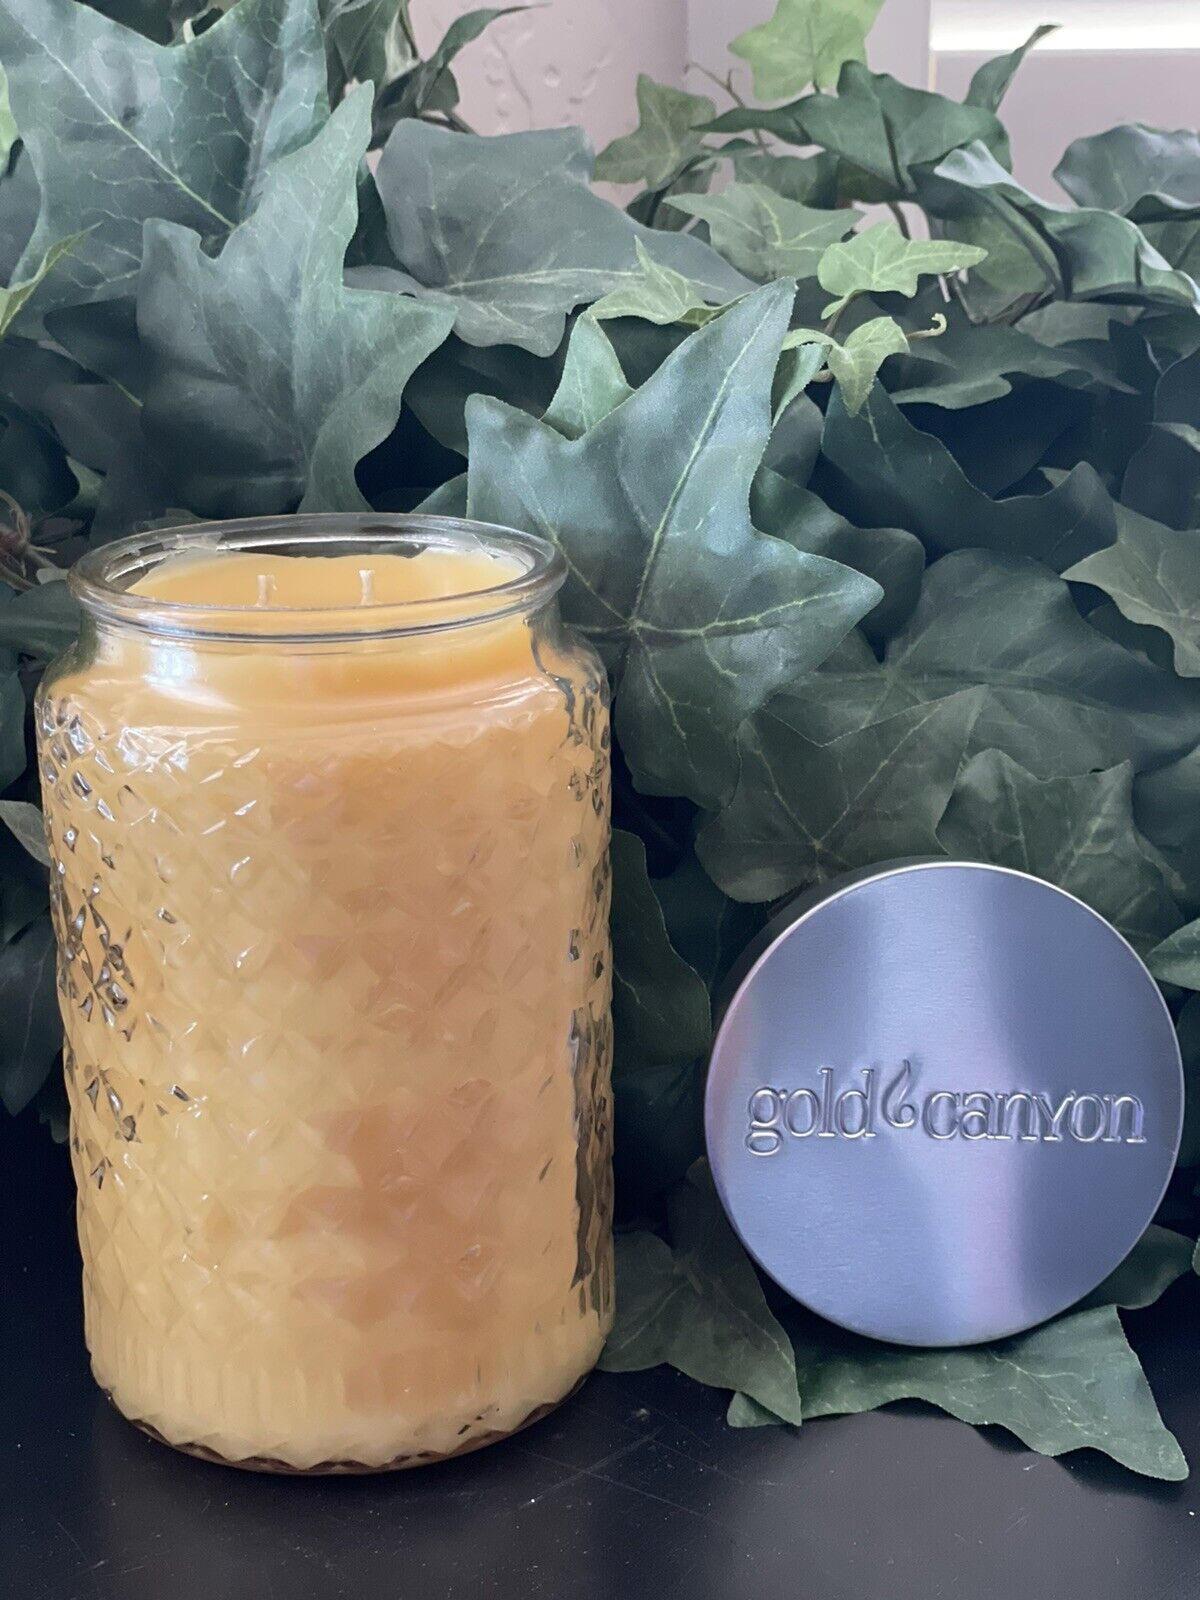 Orange Blossom 26 oz Gold Canyon Candles or What Other Fragrance U 